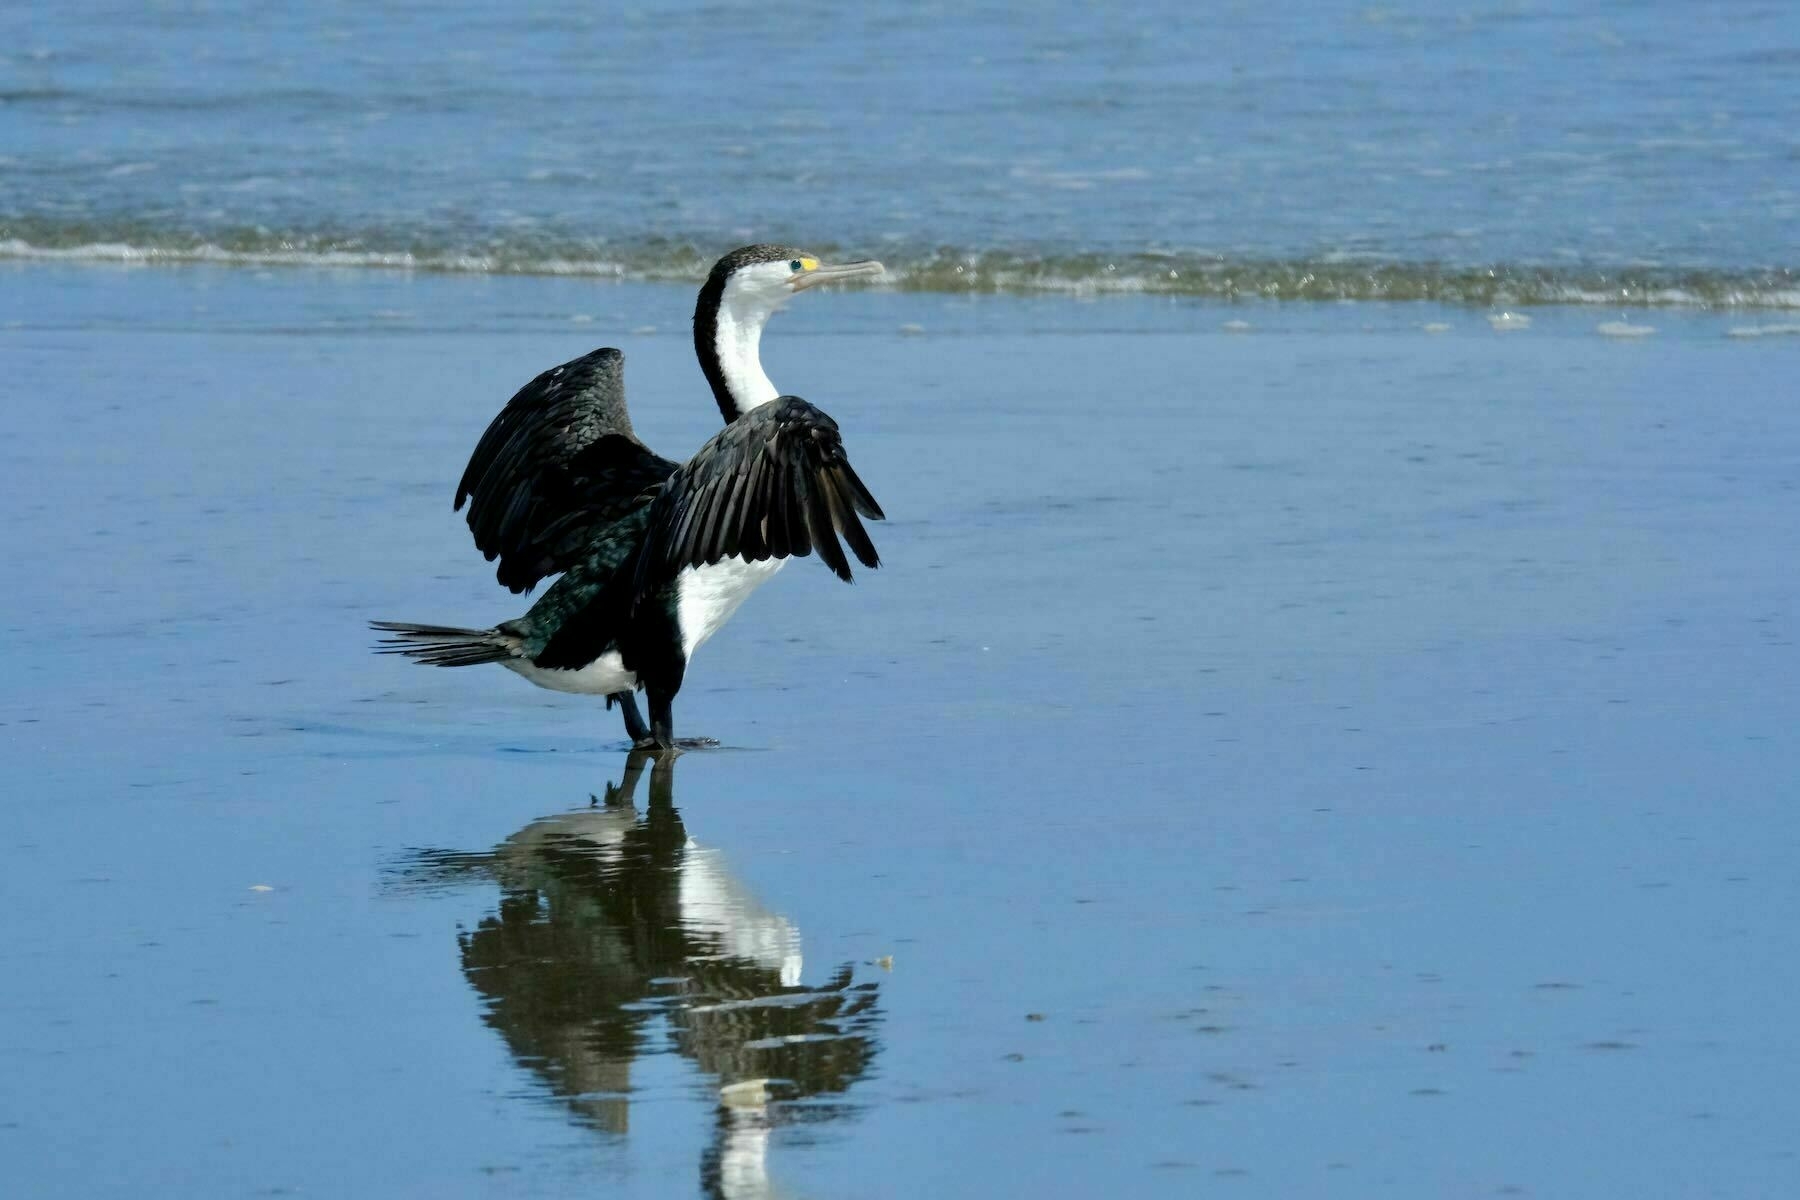 Large black and white shag with wings stretched, on wet sand. 